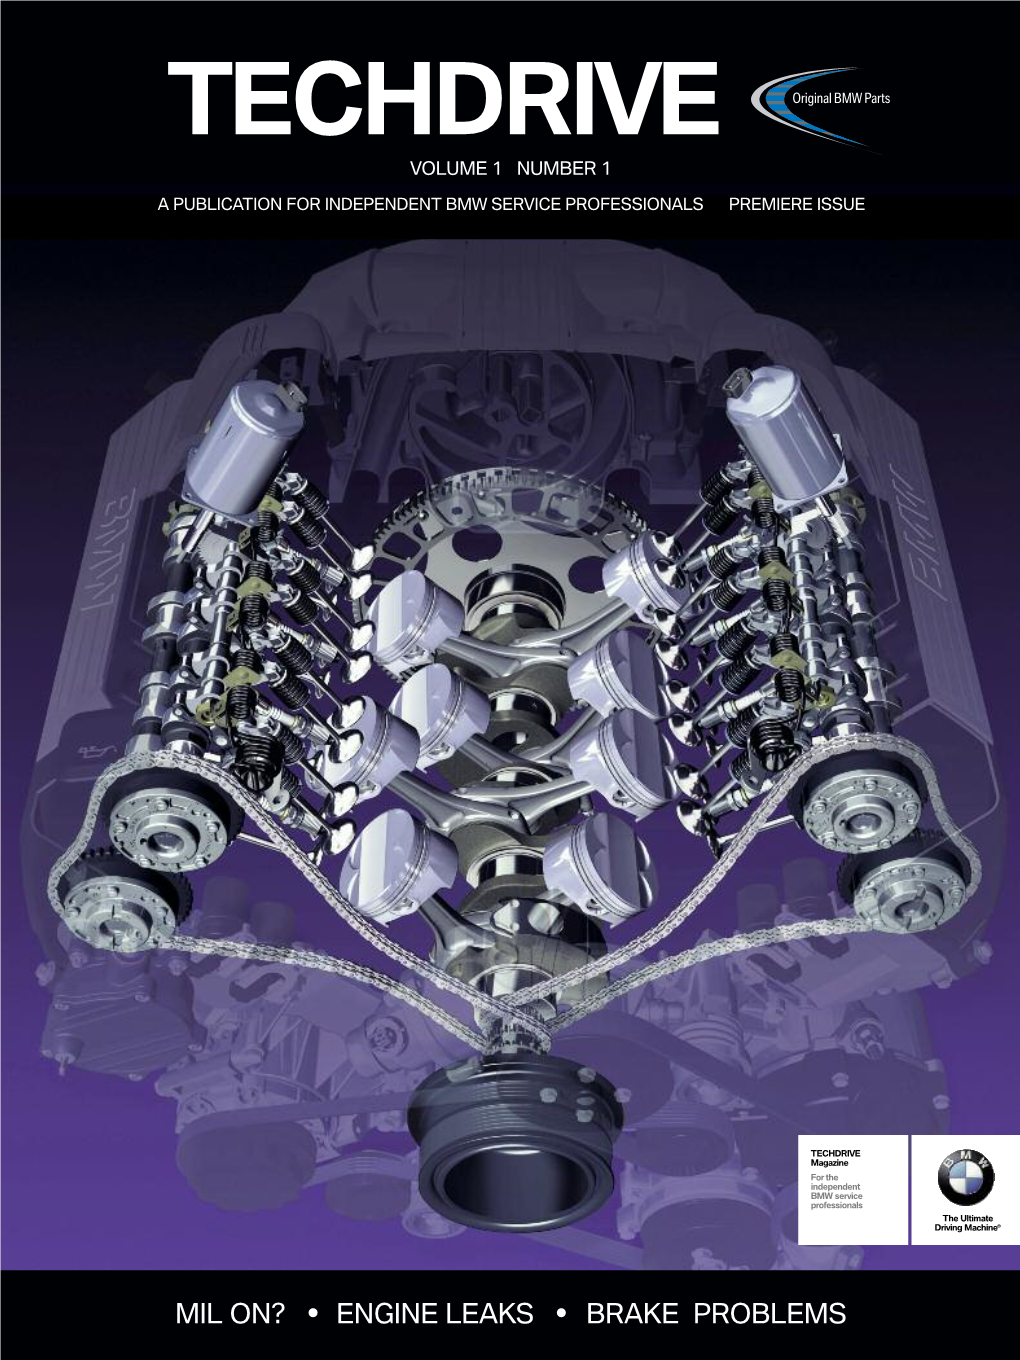 TECHDRIVE Magazine for the Independent BMW Service Professionals the Ultimate Driving Machin E®